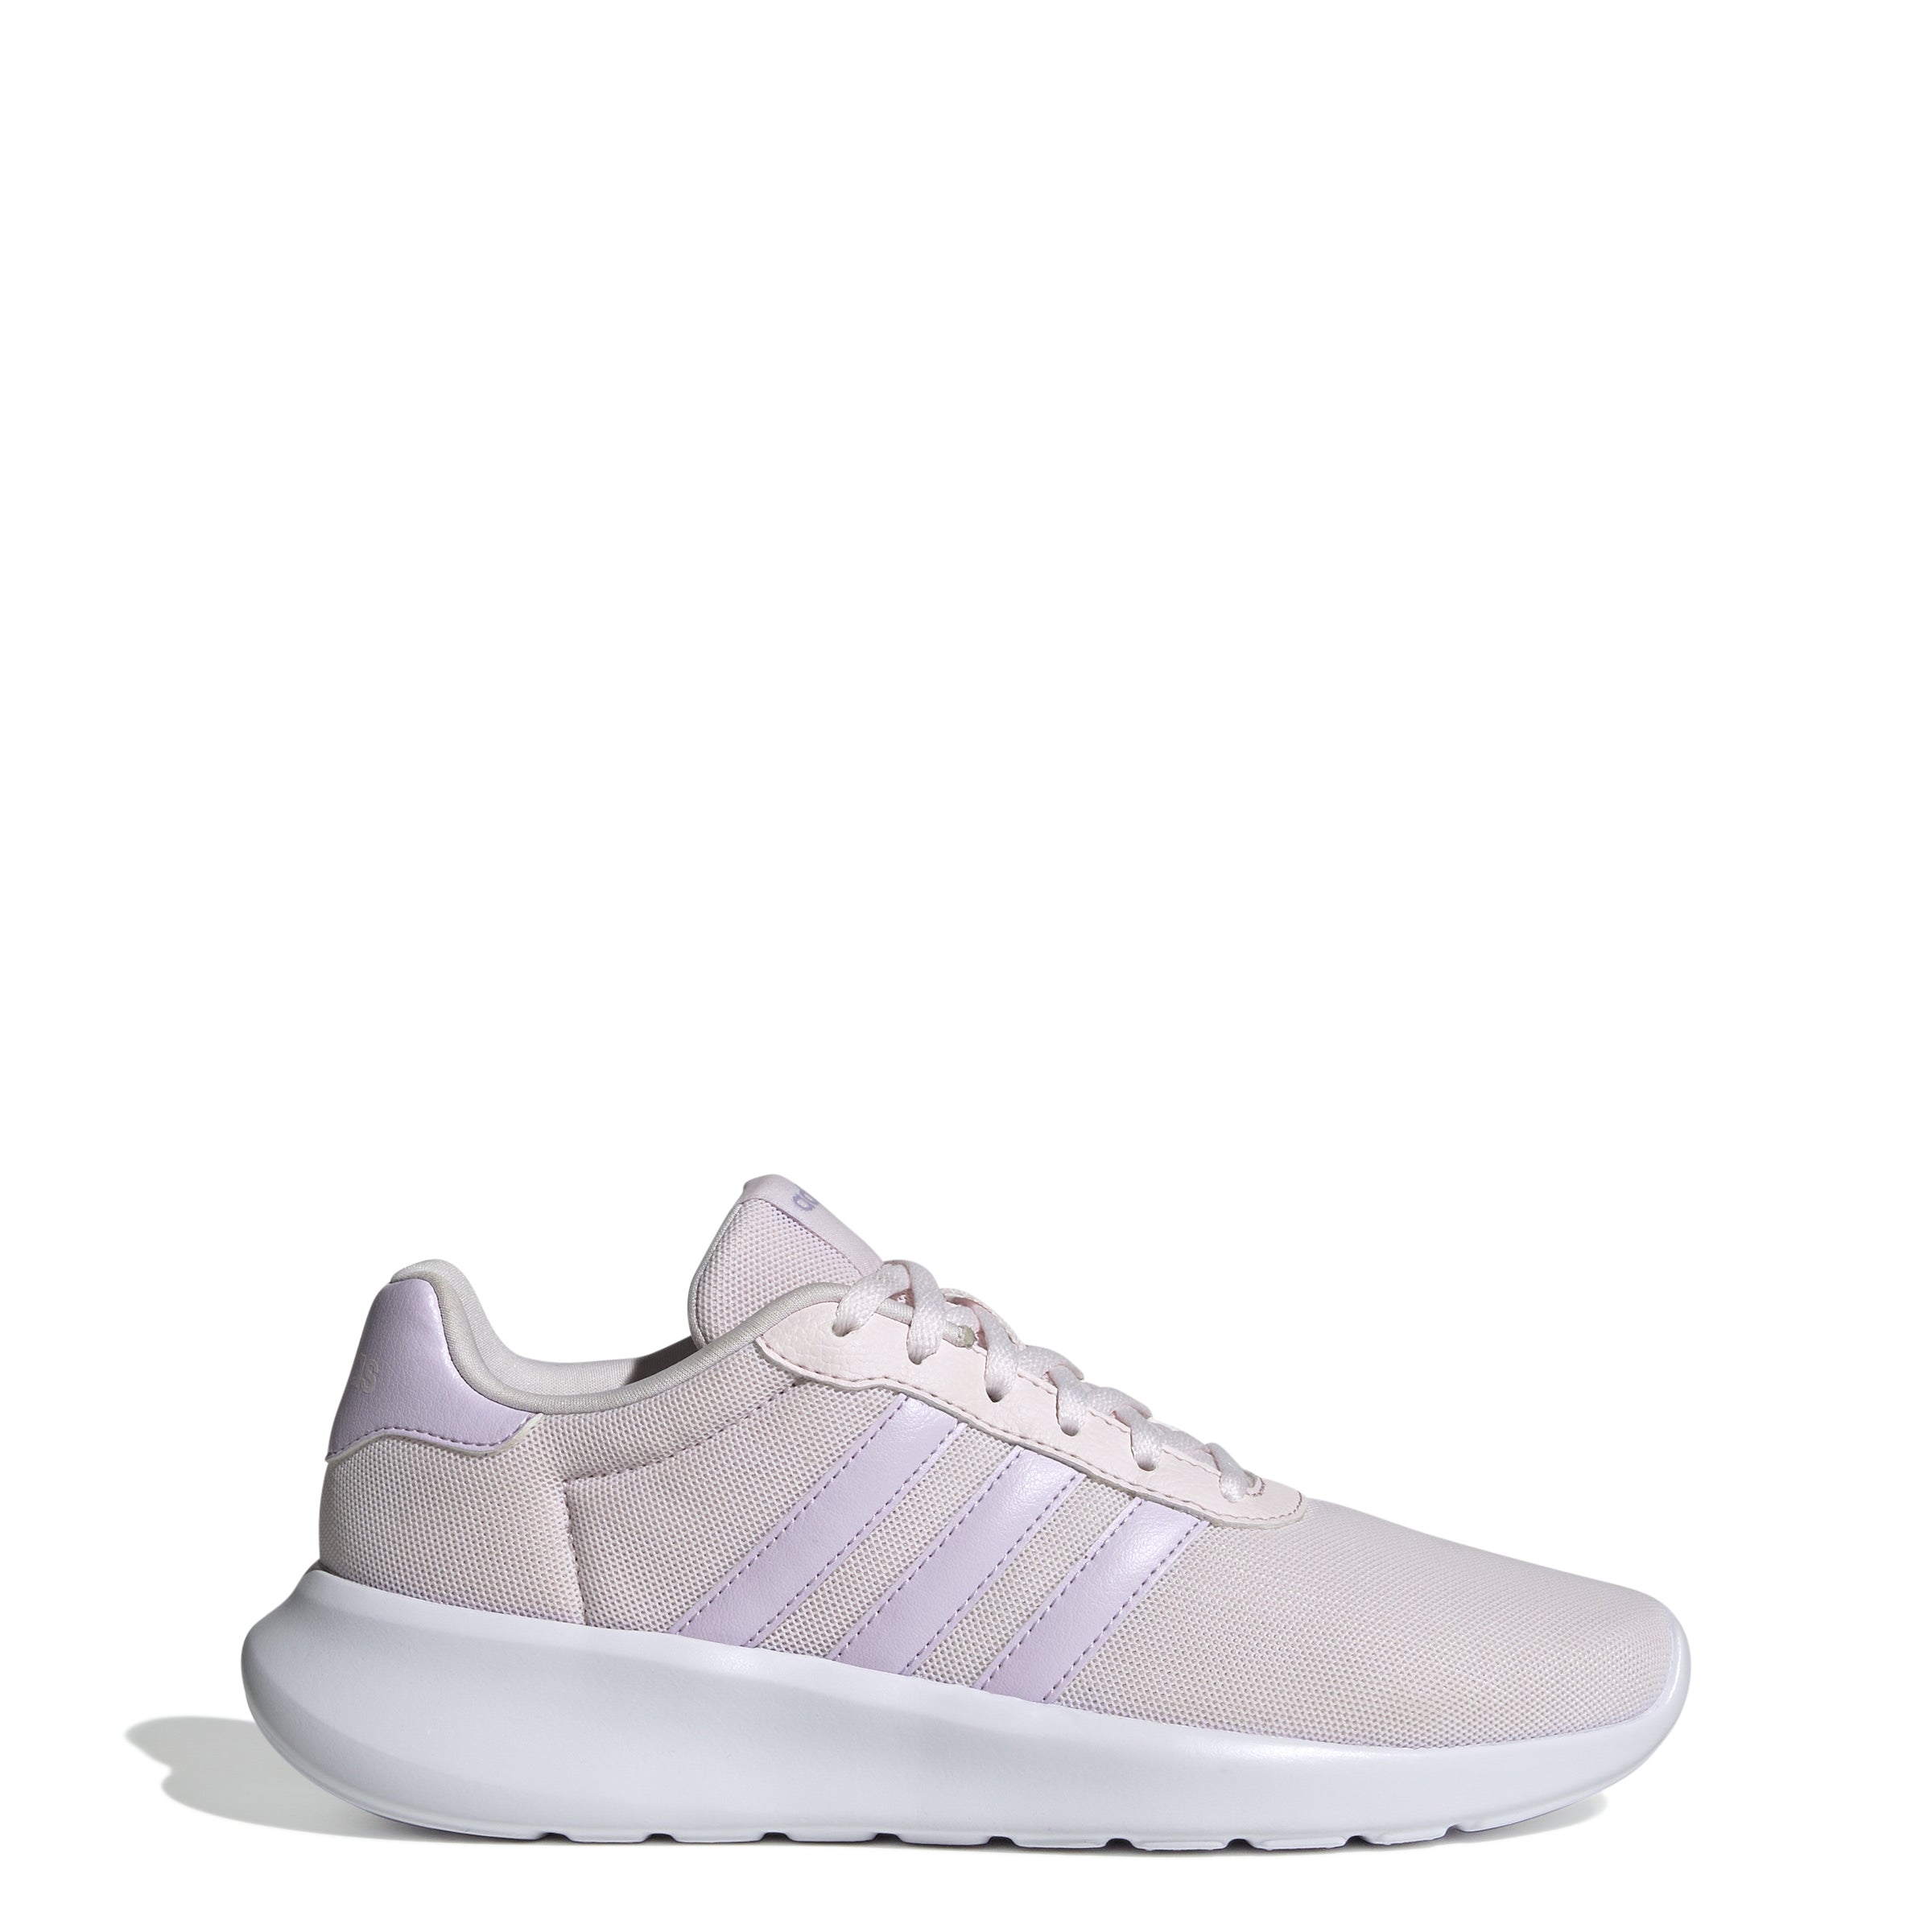 ADIDAS LITE RACER 3.0 IG3613 RUNNING SHOES (W)